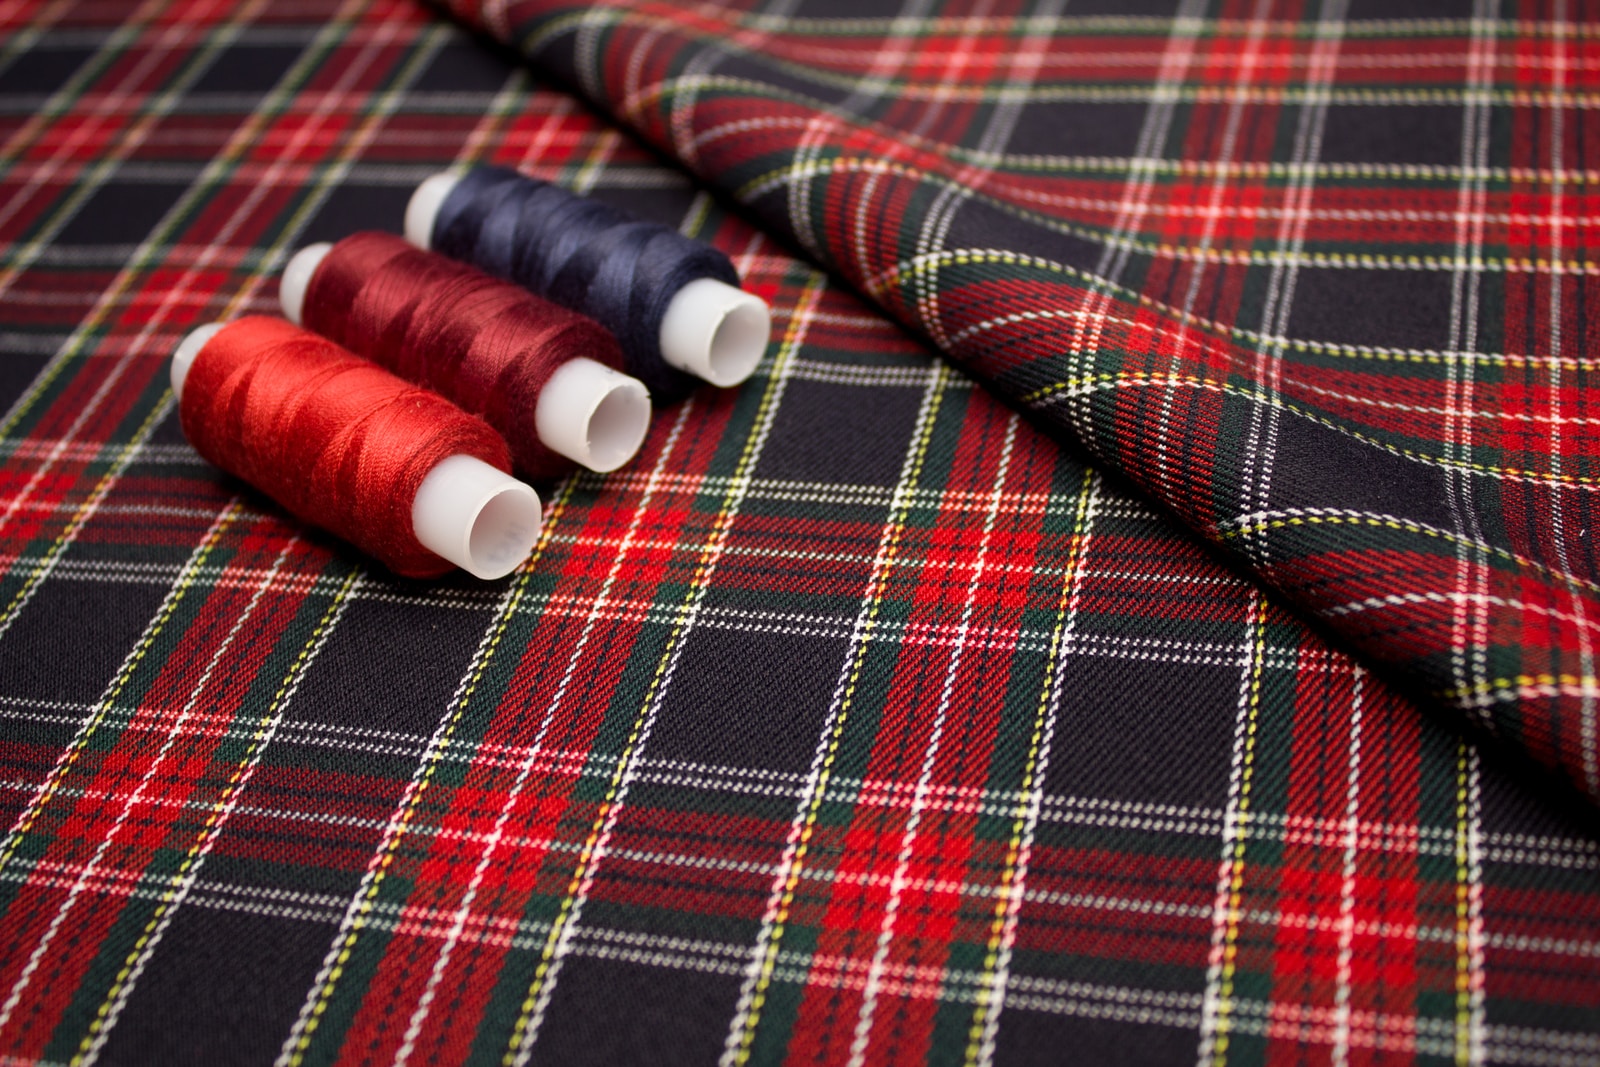 red and white thread on red and white plaid textile